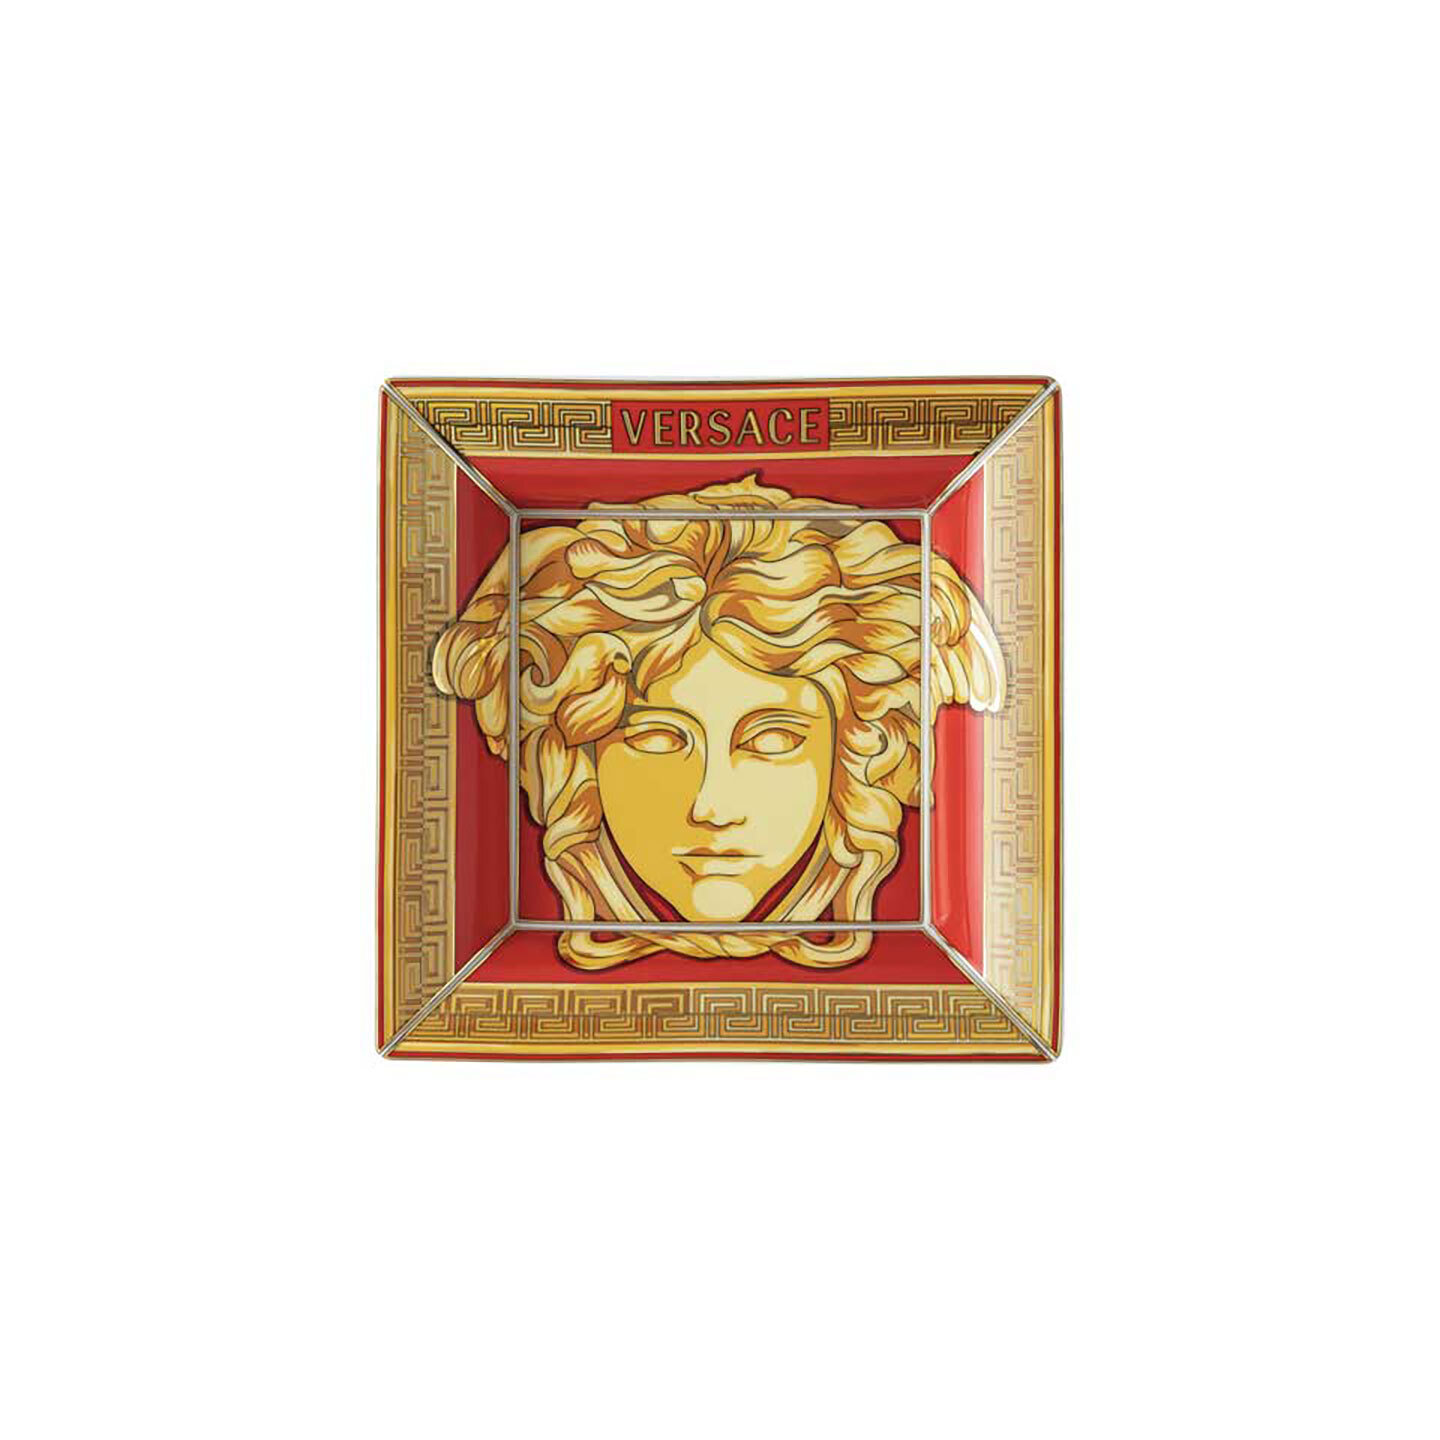 Versace Medusa Amplified Golden Coin Tray 7 Inch